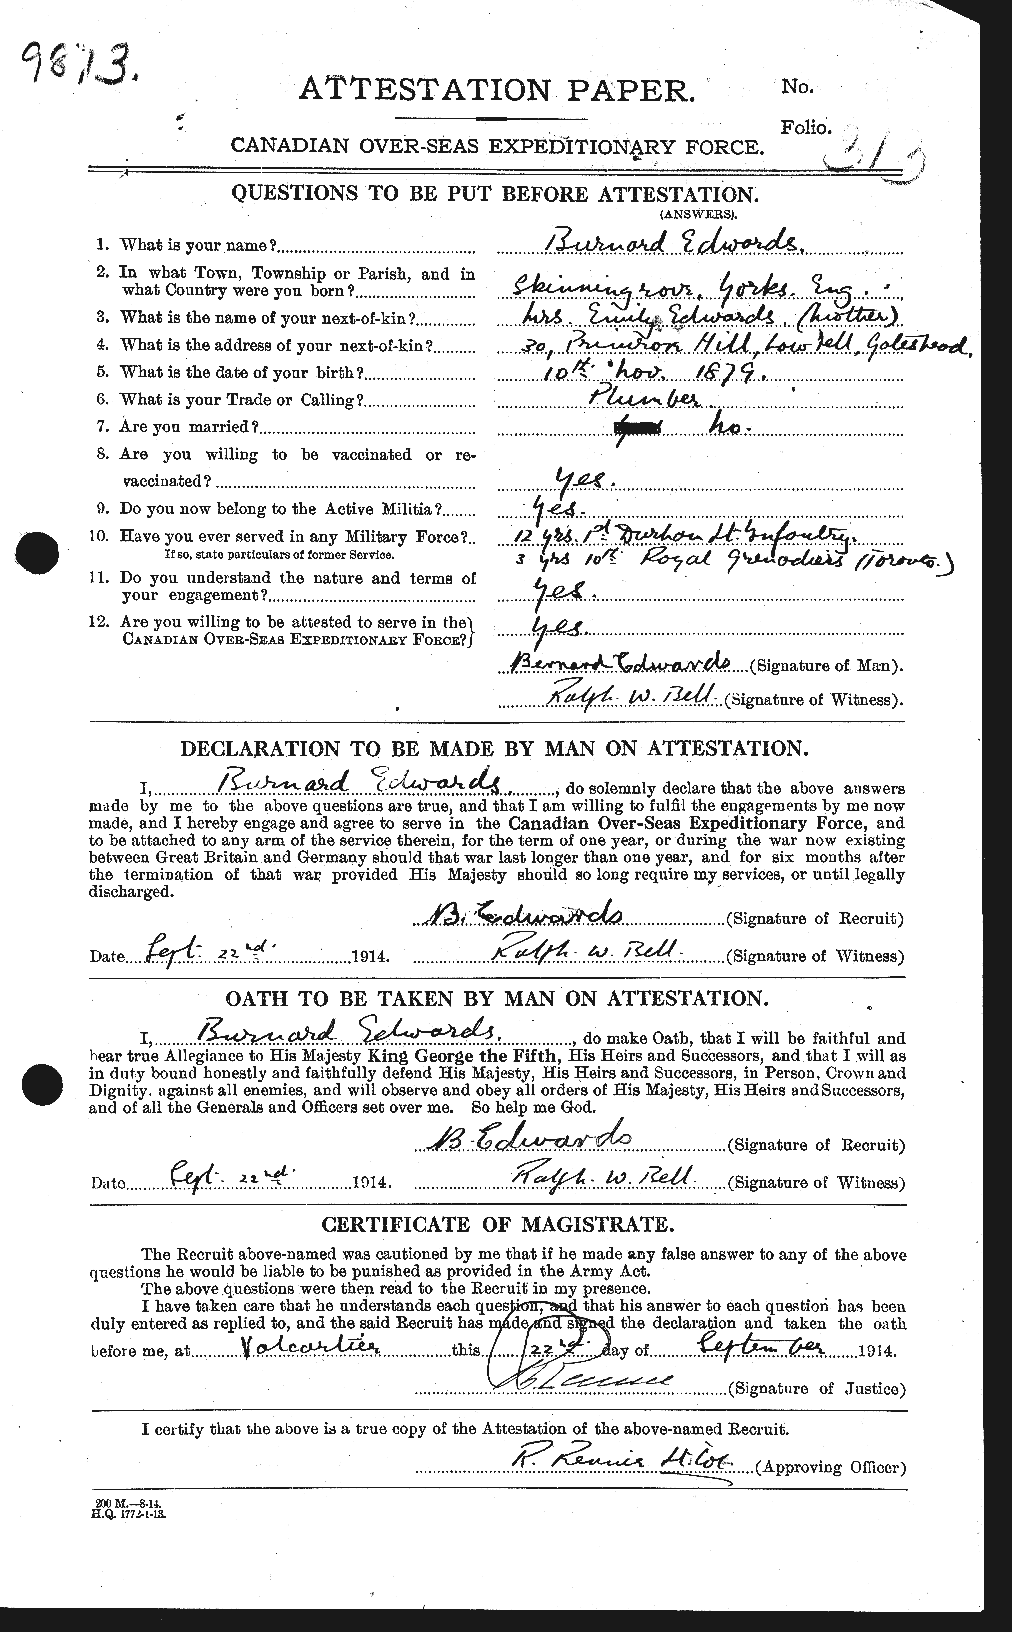 Personnel Records of the First World War - CEF 313152a